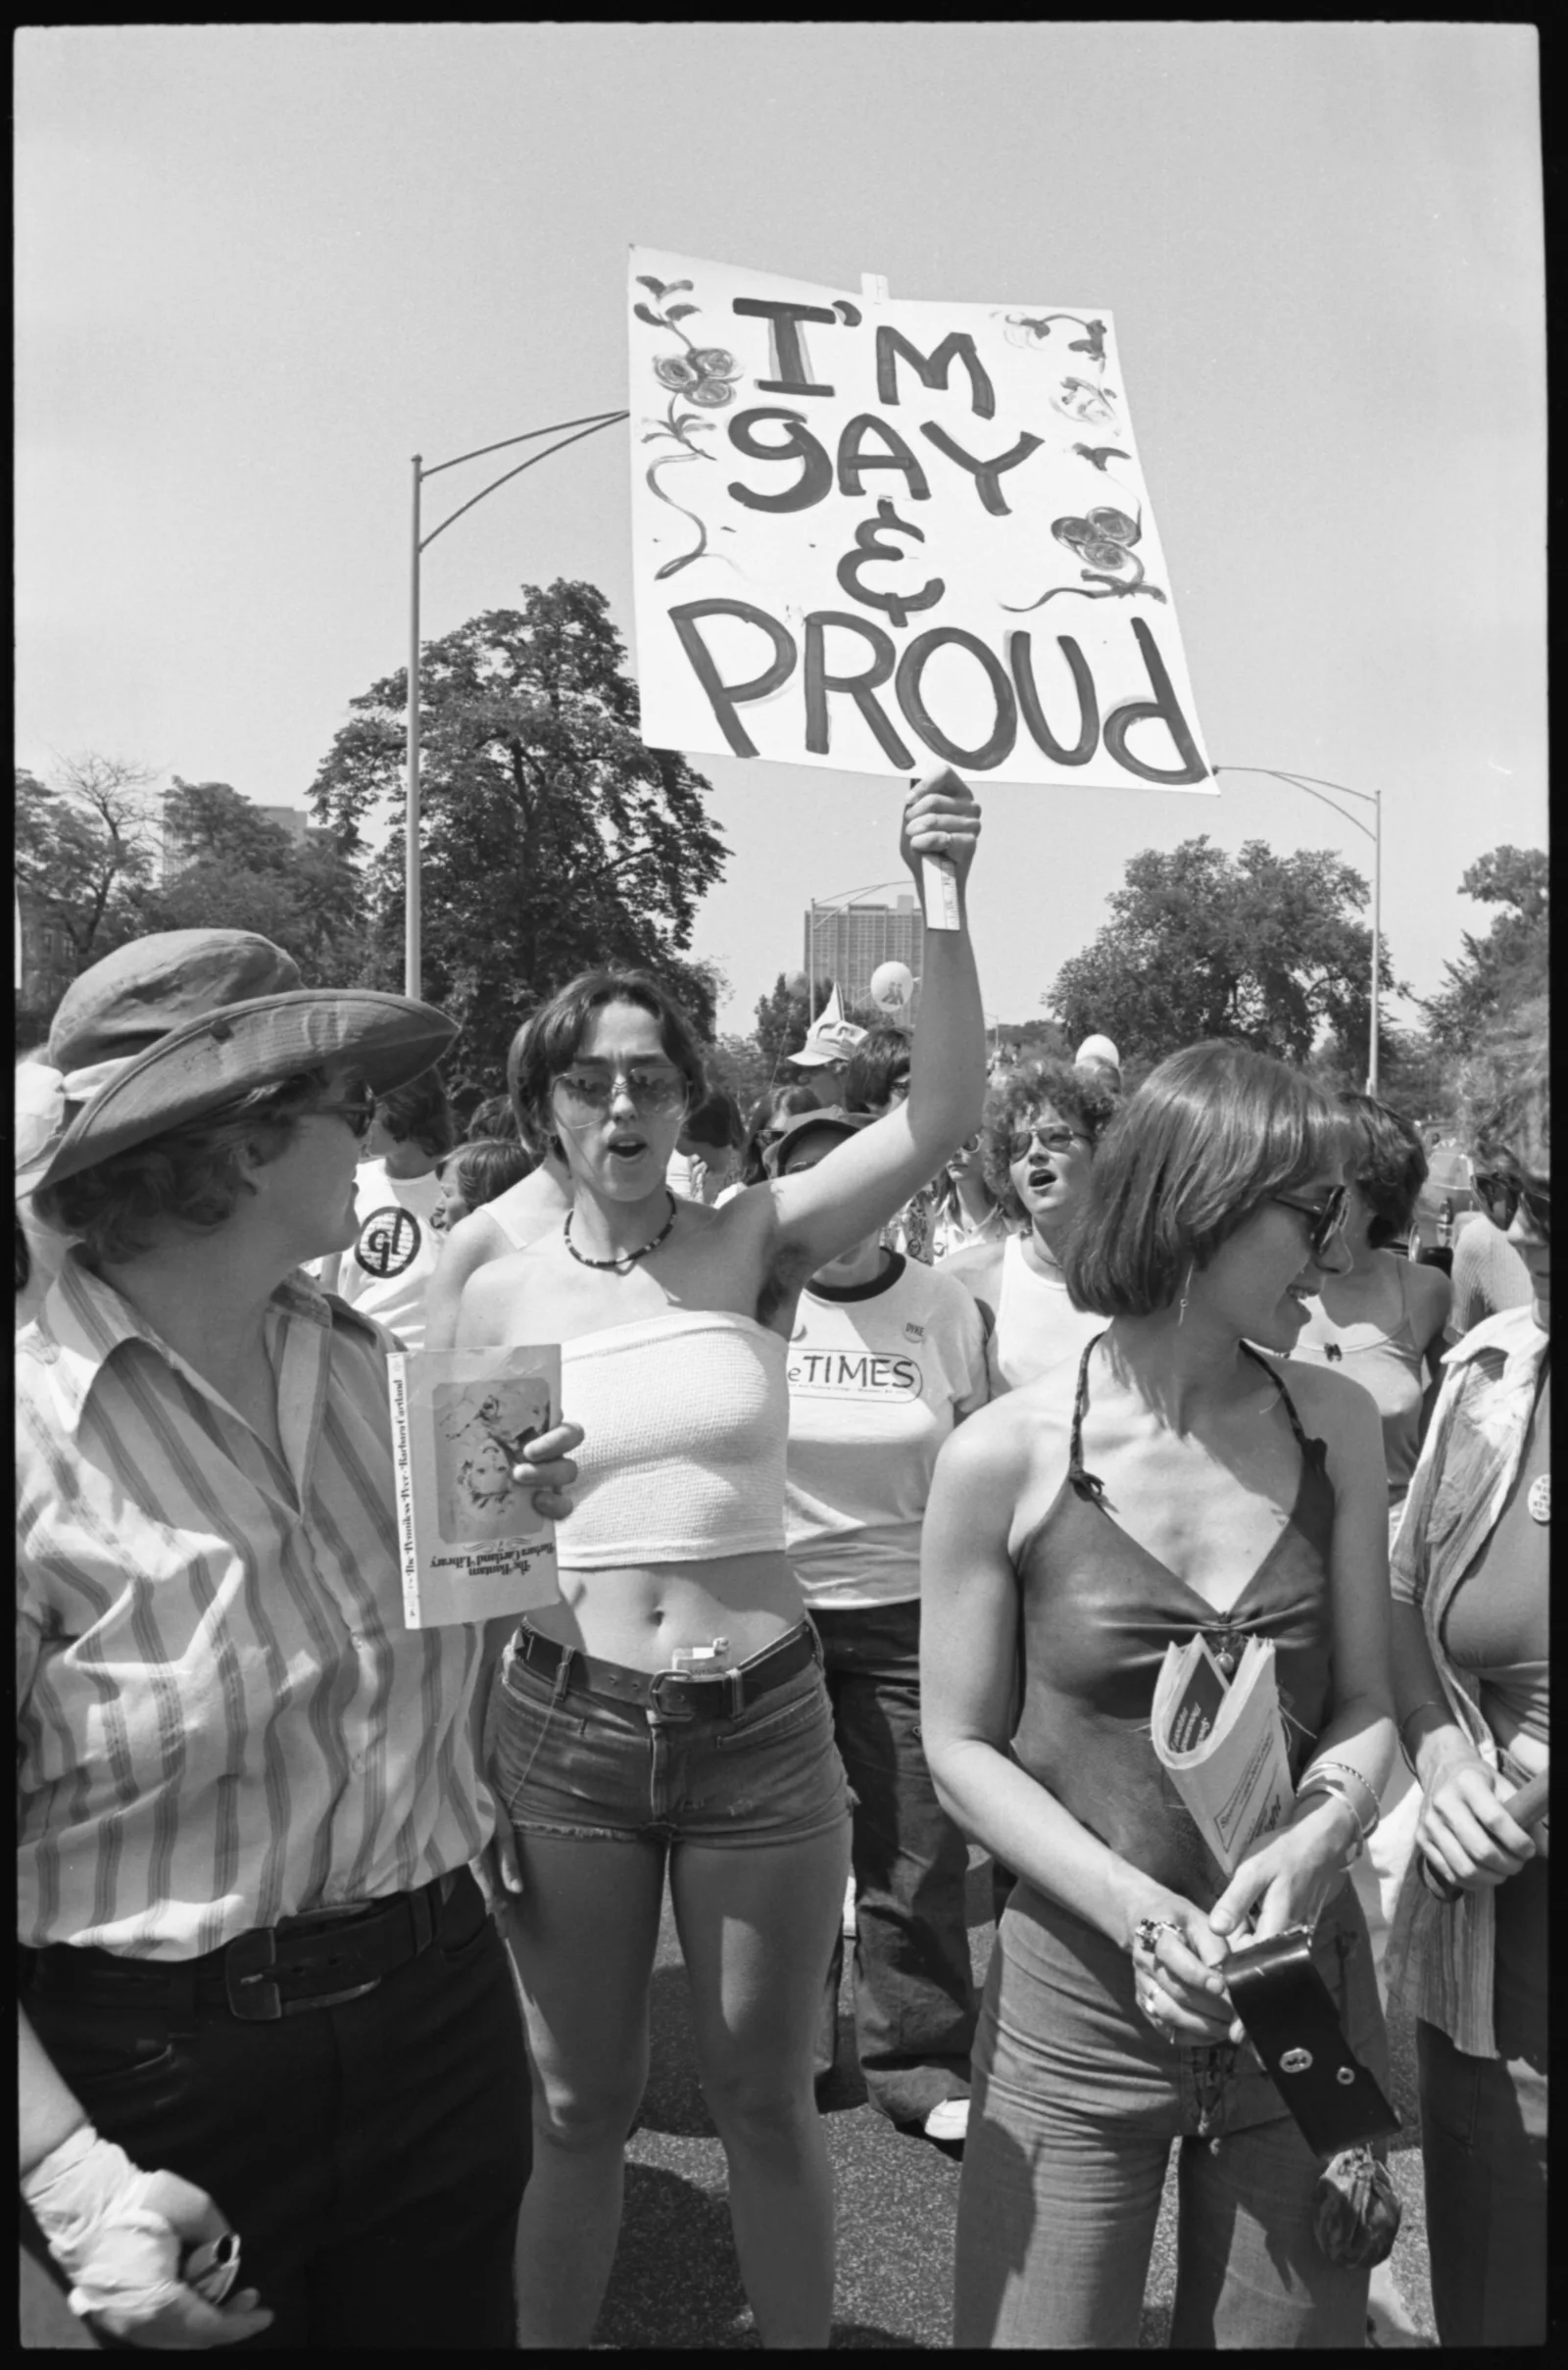 A woman holds a sign that reads "I'm Gay and I'm Proud"